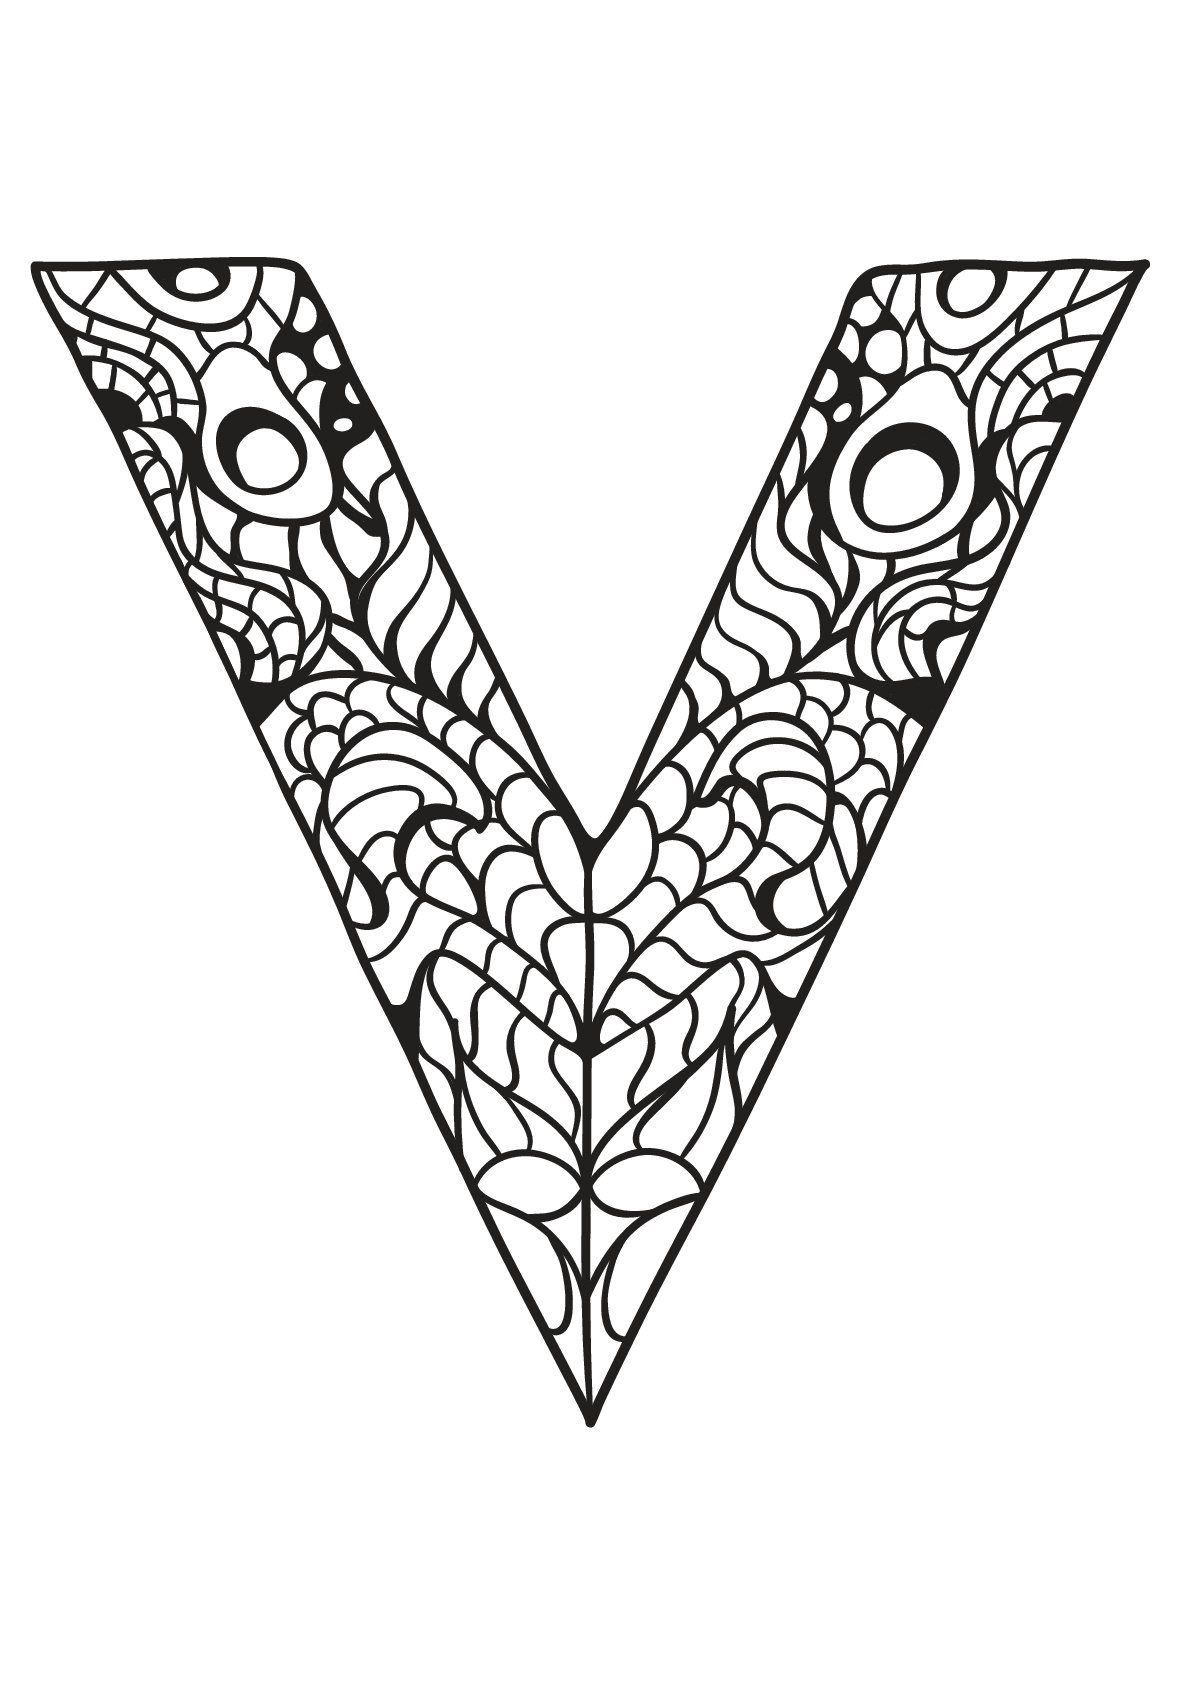 Alphabet coloring page to print and color for free : V